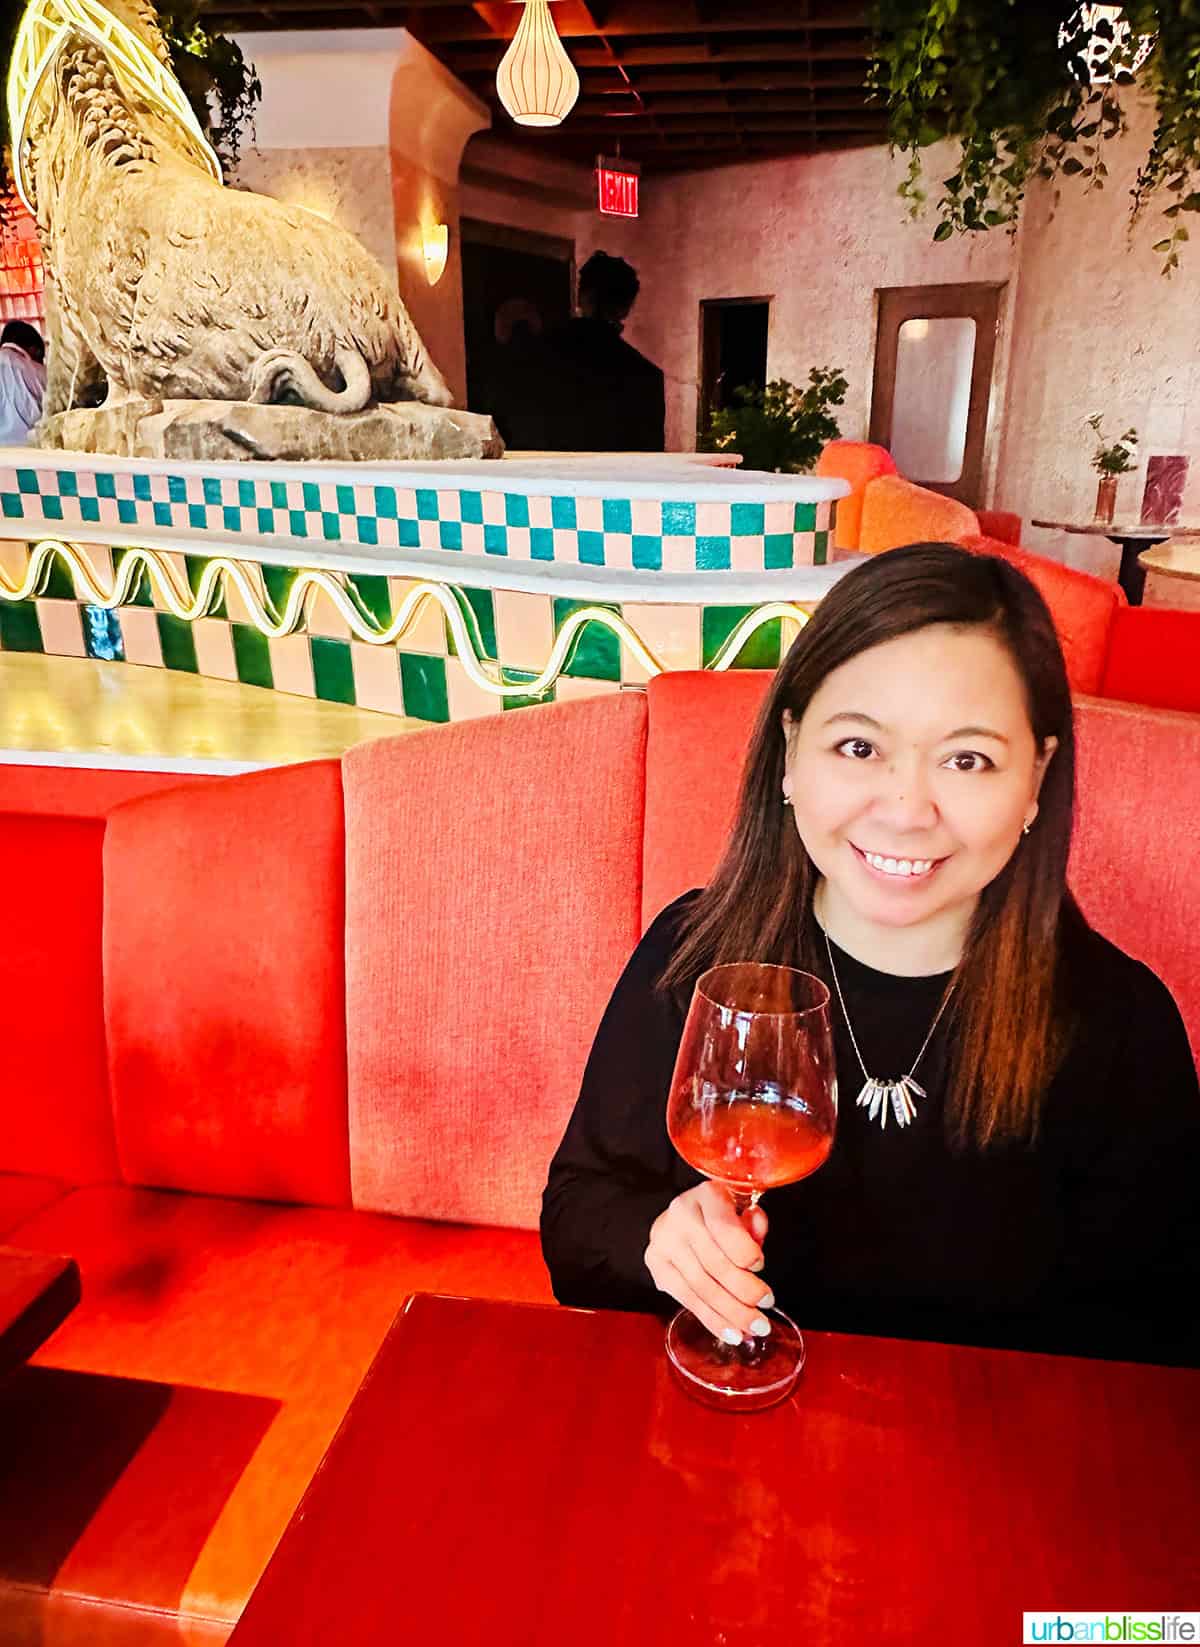 Marlynn Jayme Schotland holding a glass of non-alcoholic wine at Bad Roman restaurant in New York City.